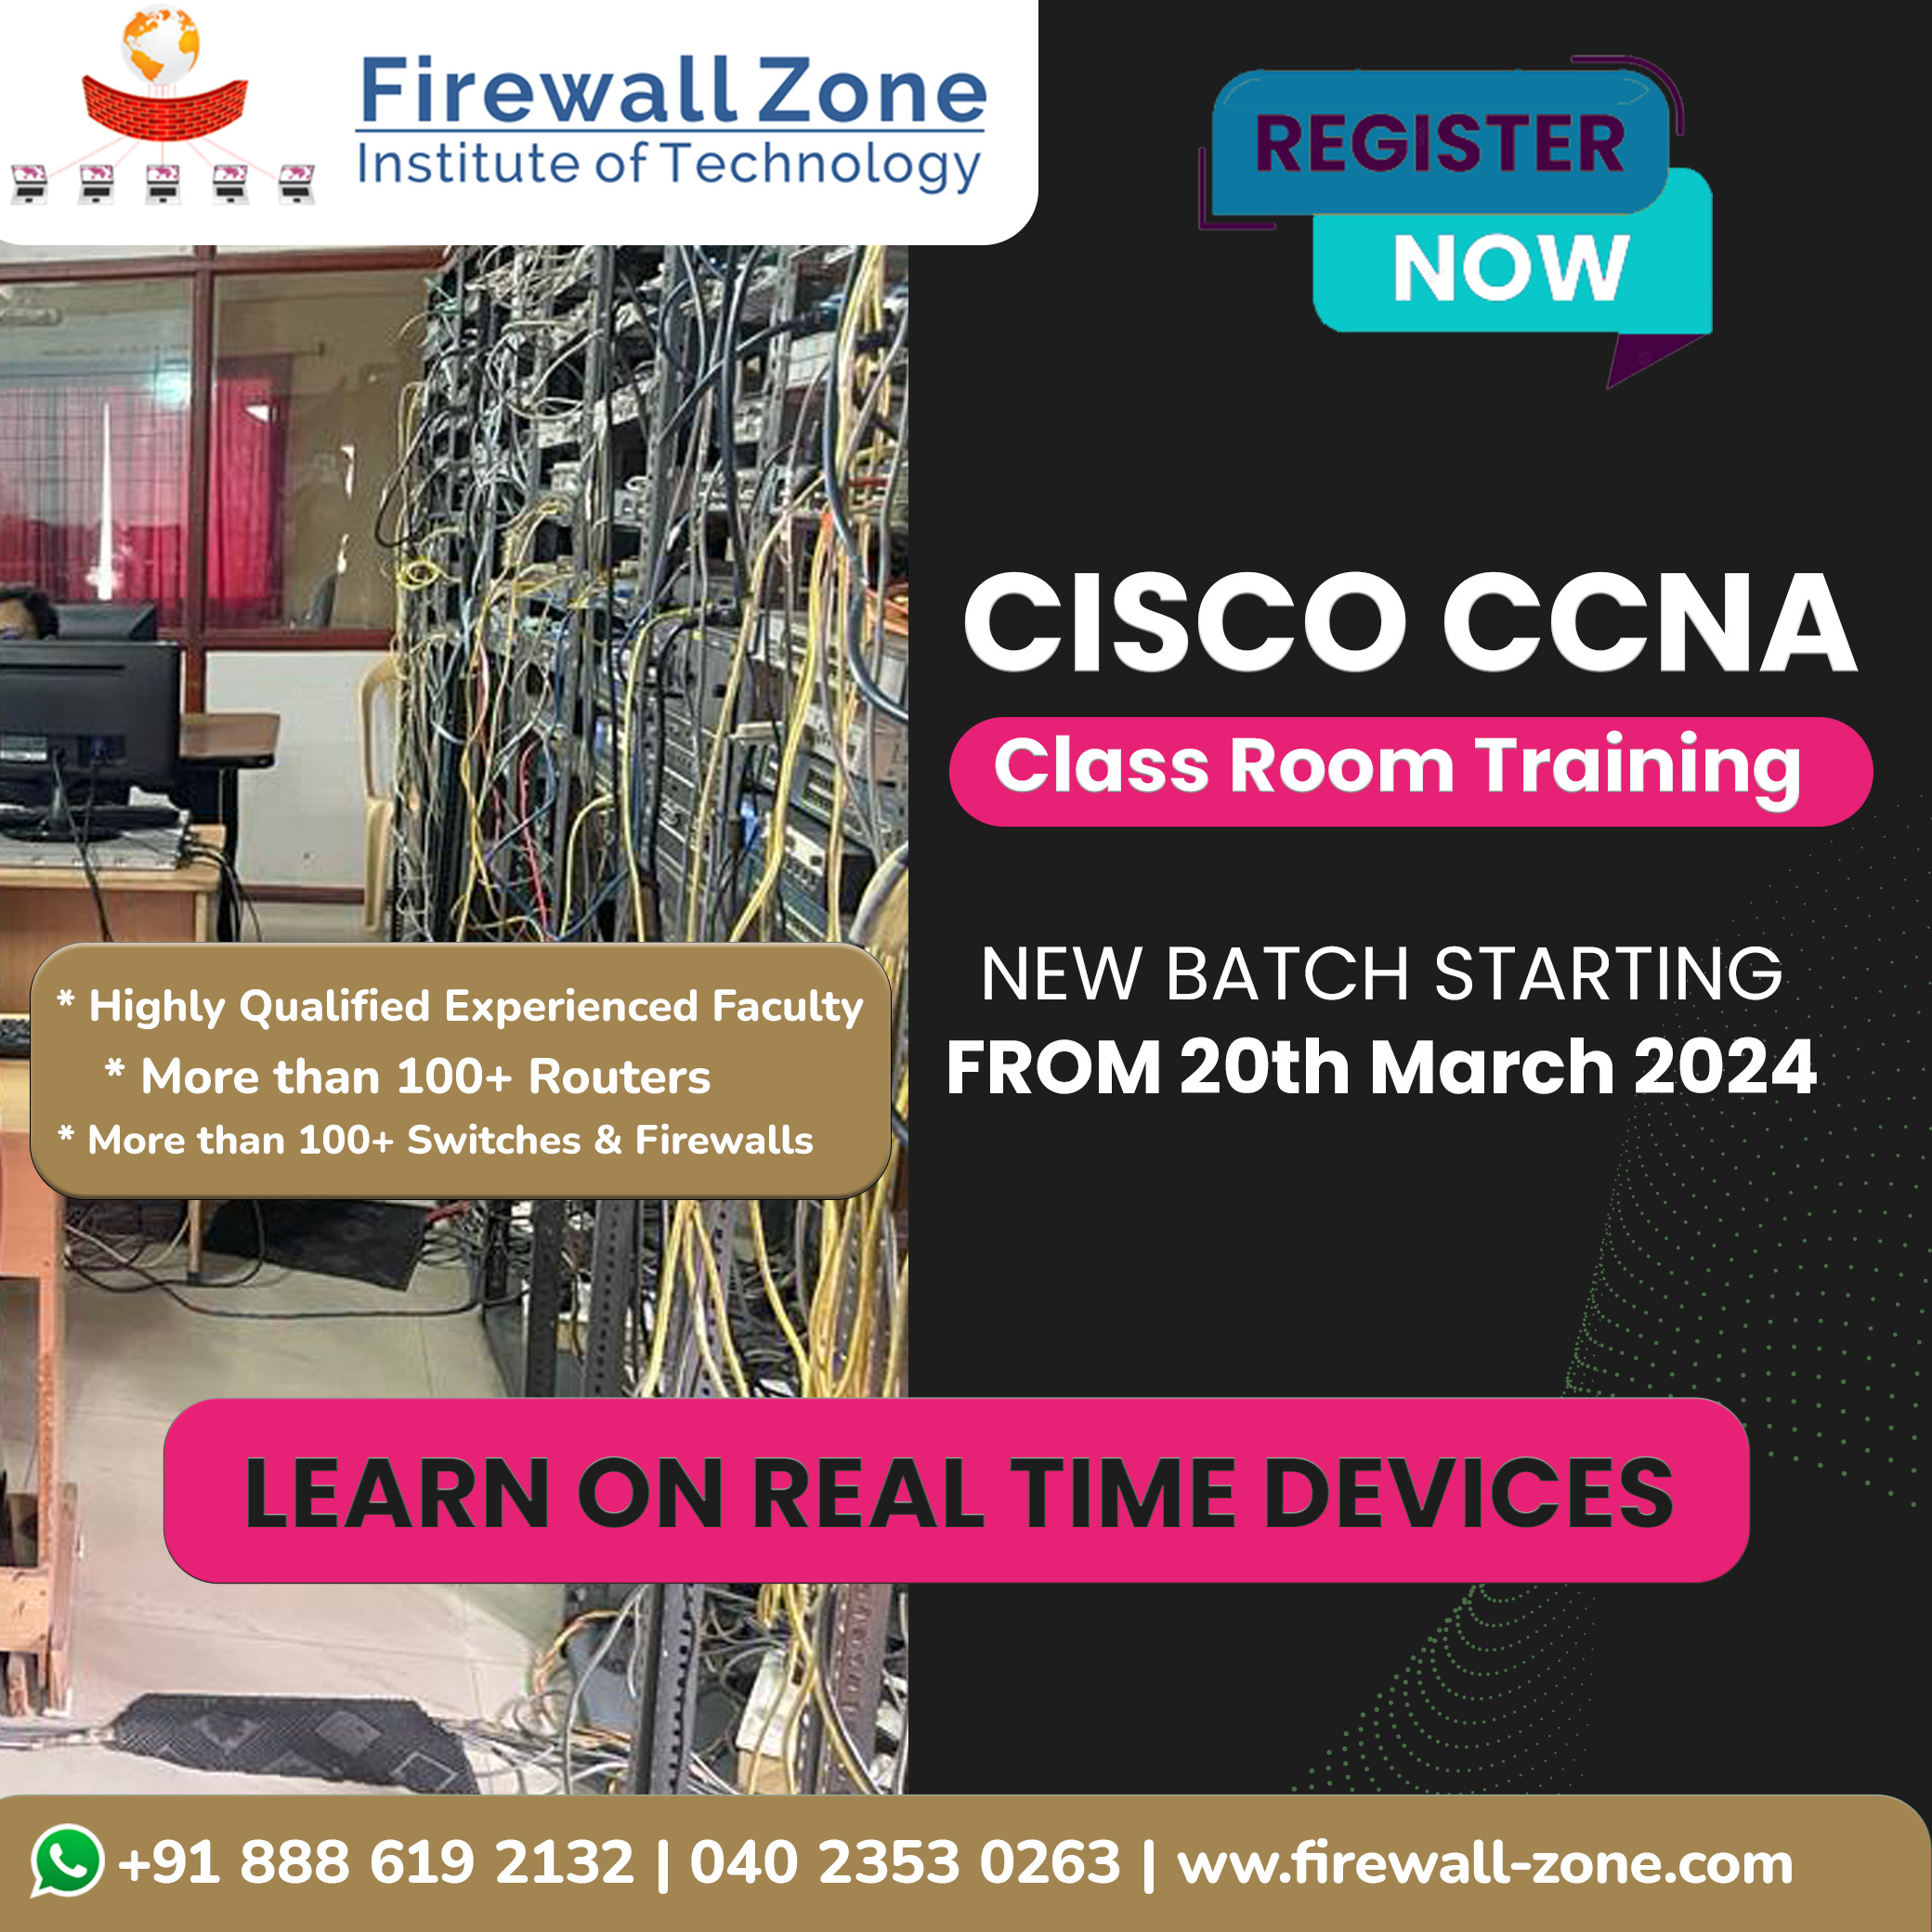 Cisco CCNA Routing and Switching Training Program at Firewall-zone Institute of IT, Hyderabad, Telangana, India